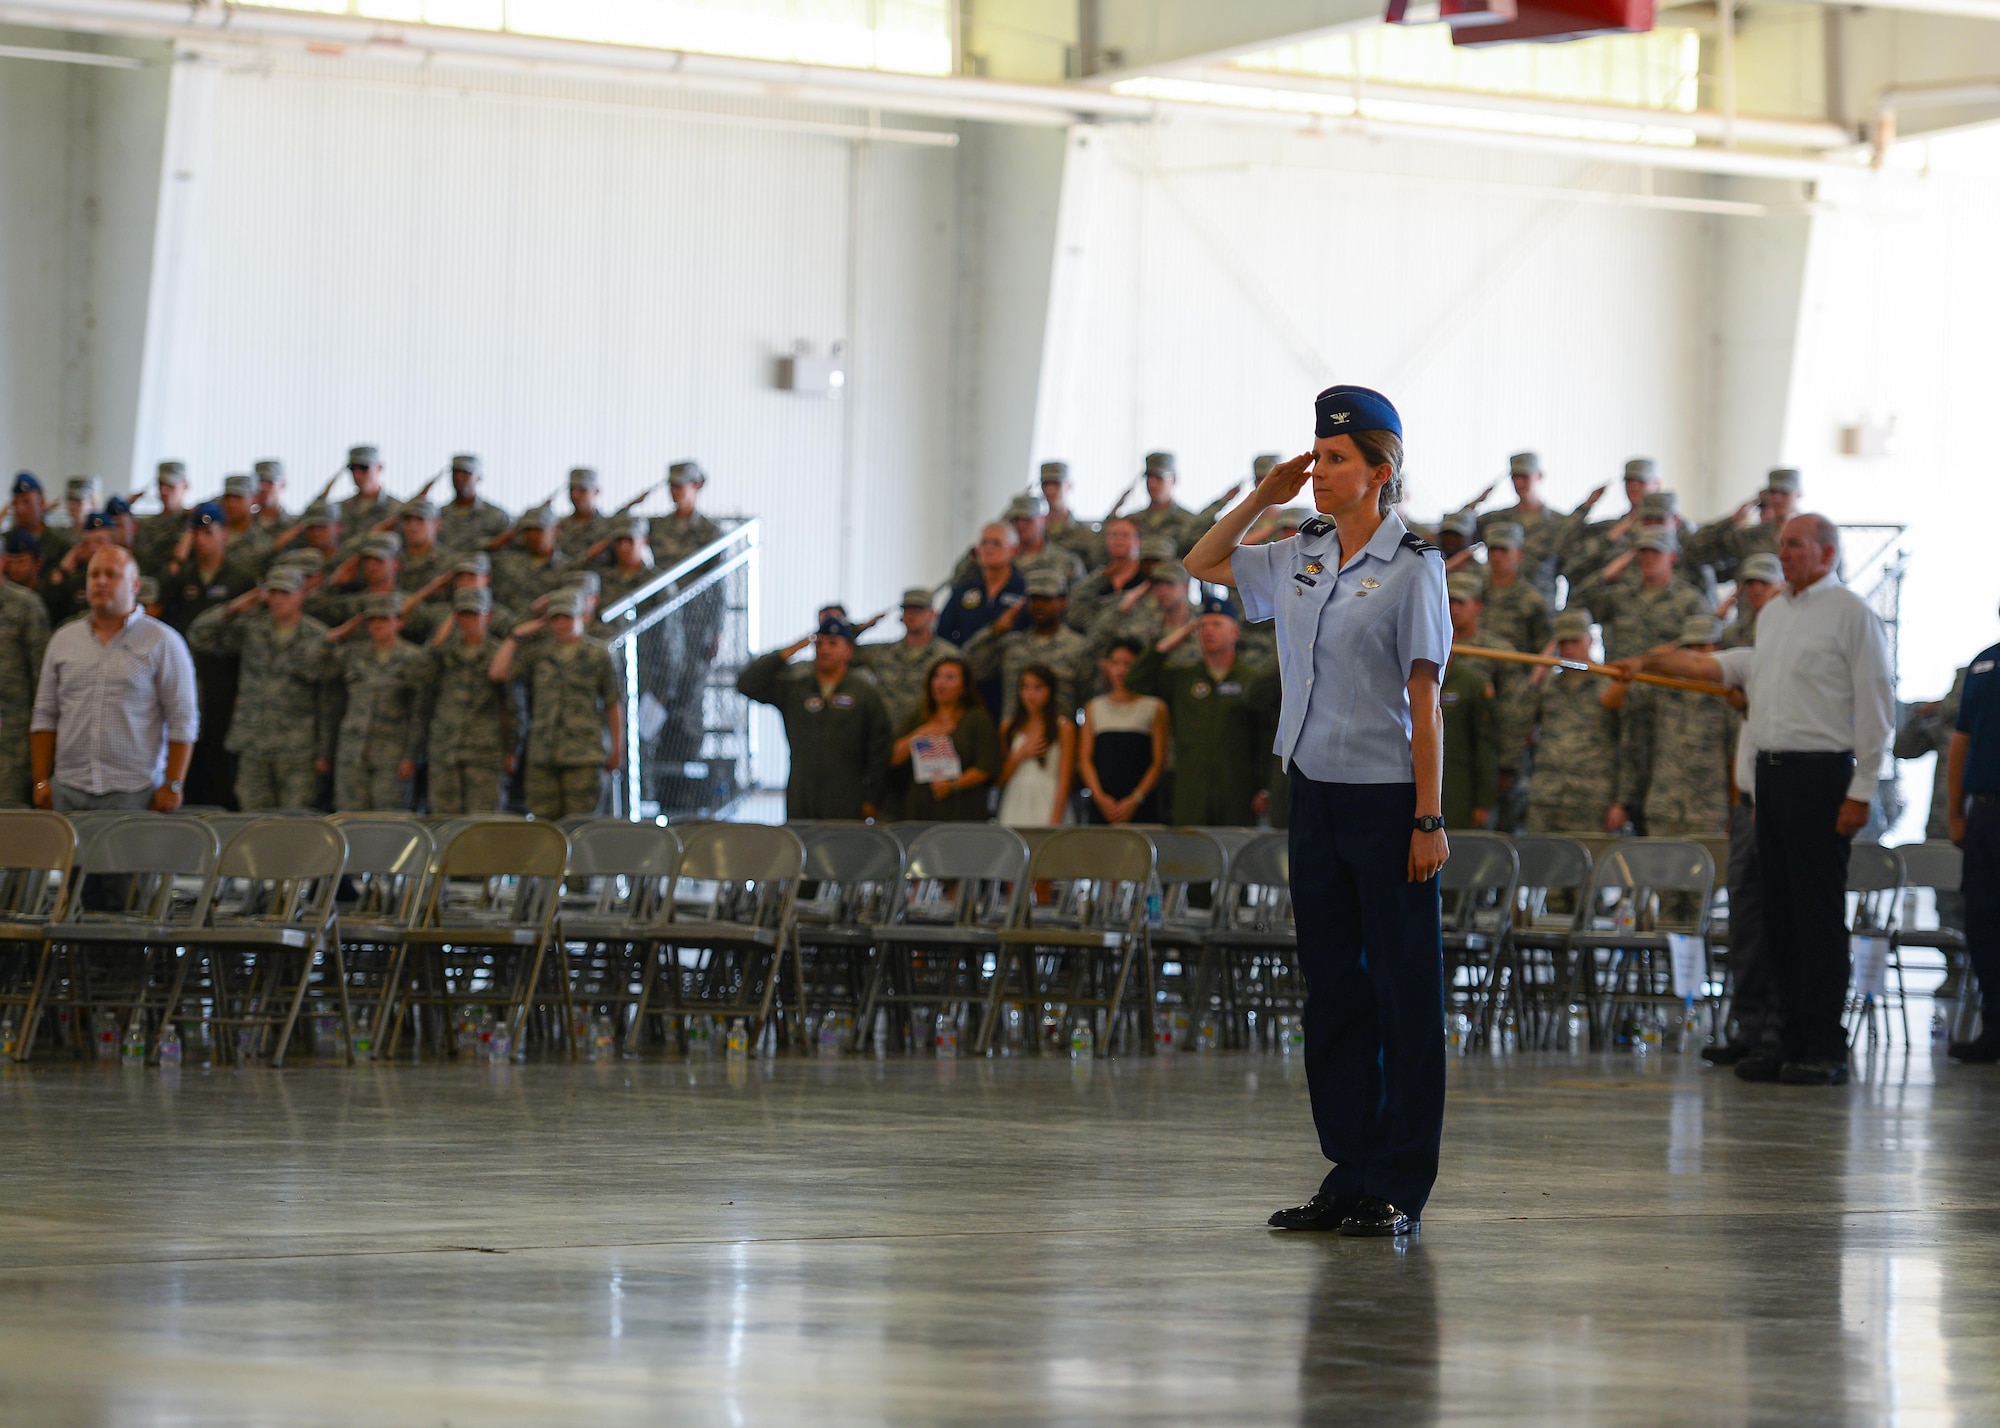 U.S. Air Force Col. Michelle Pryor, 47th Flying Training Wing vice commander, renders a salute in formation at the wing’s change of command ceremony at Laughlin Air Force Base, Tx., June 28, 2017.  Col. Pryor is a command pilot with more than 2,000 flight hours and oversees the base’s operations and undergraduate pilot training program.